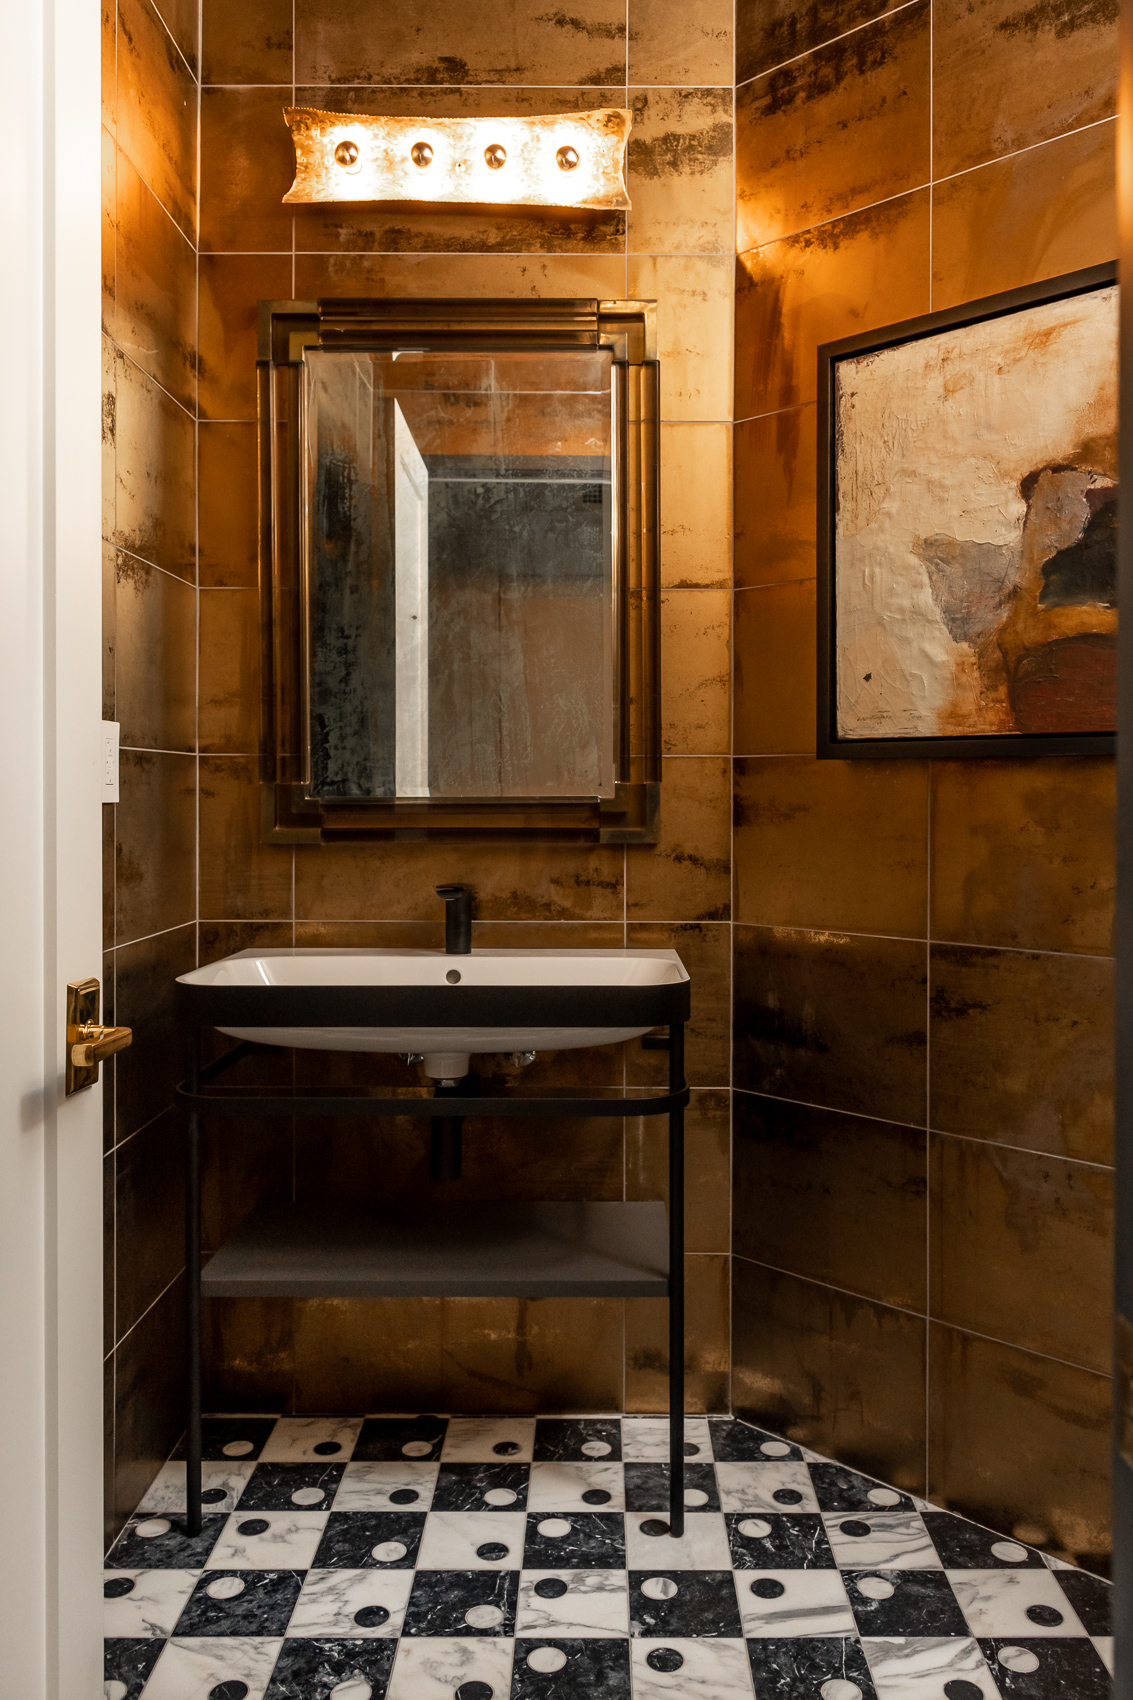 Standing bathroom sink with mirror on checkered floors in small copper walled bathroom.